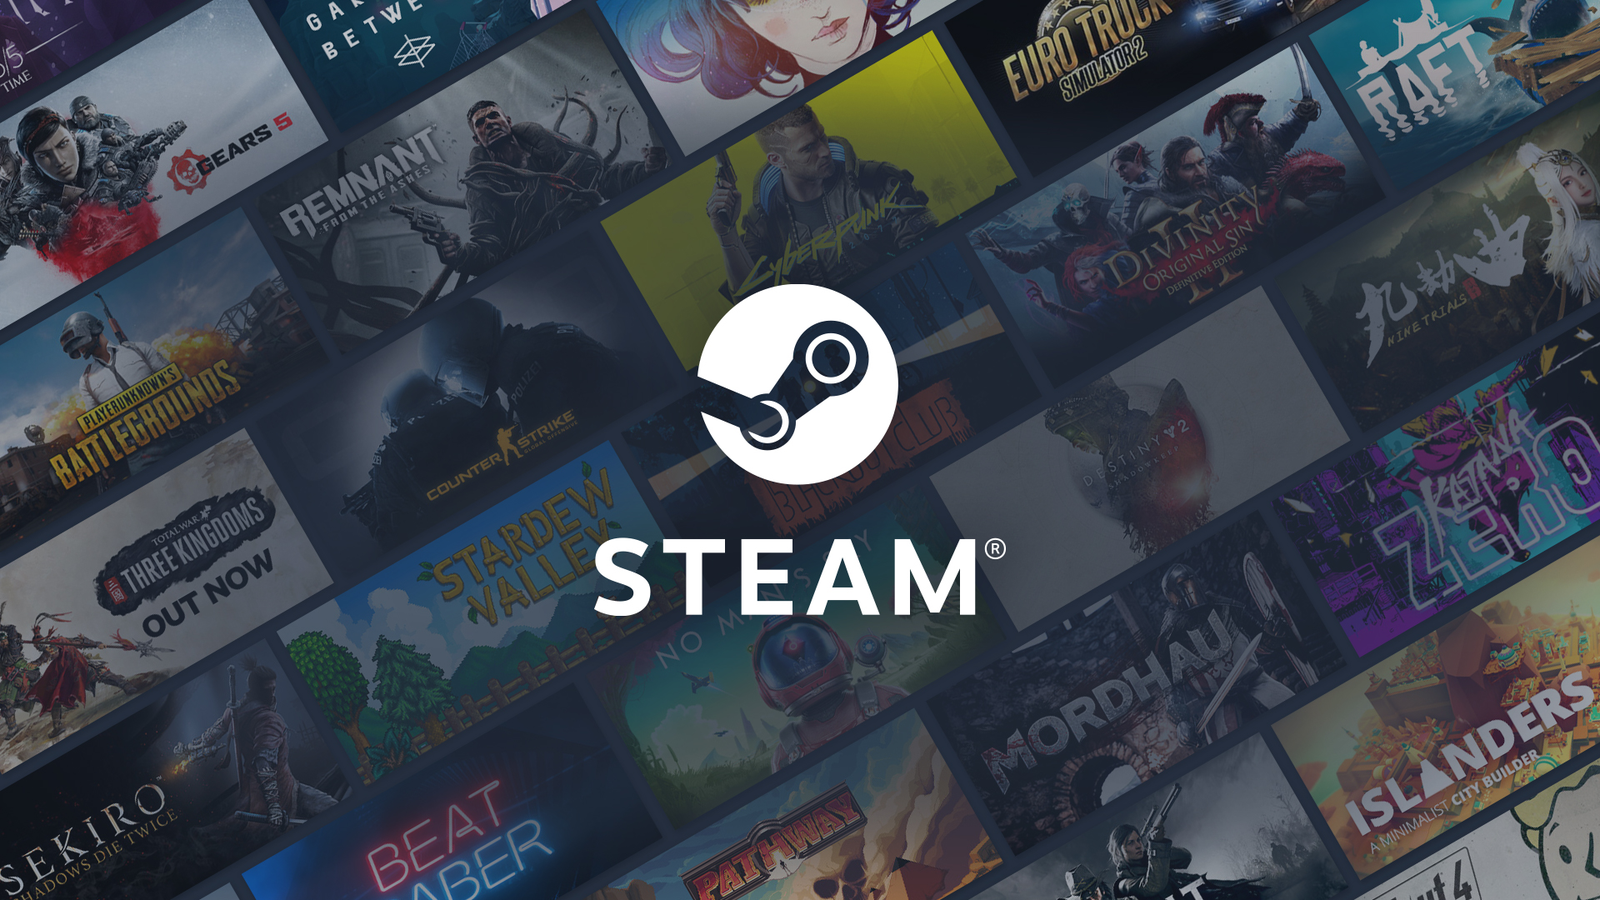 Valve spruces up the Steam store with better social features, networking,  and reach